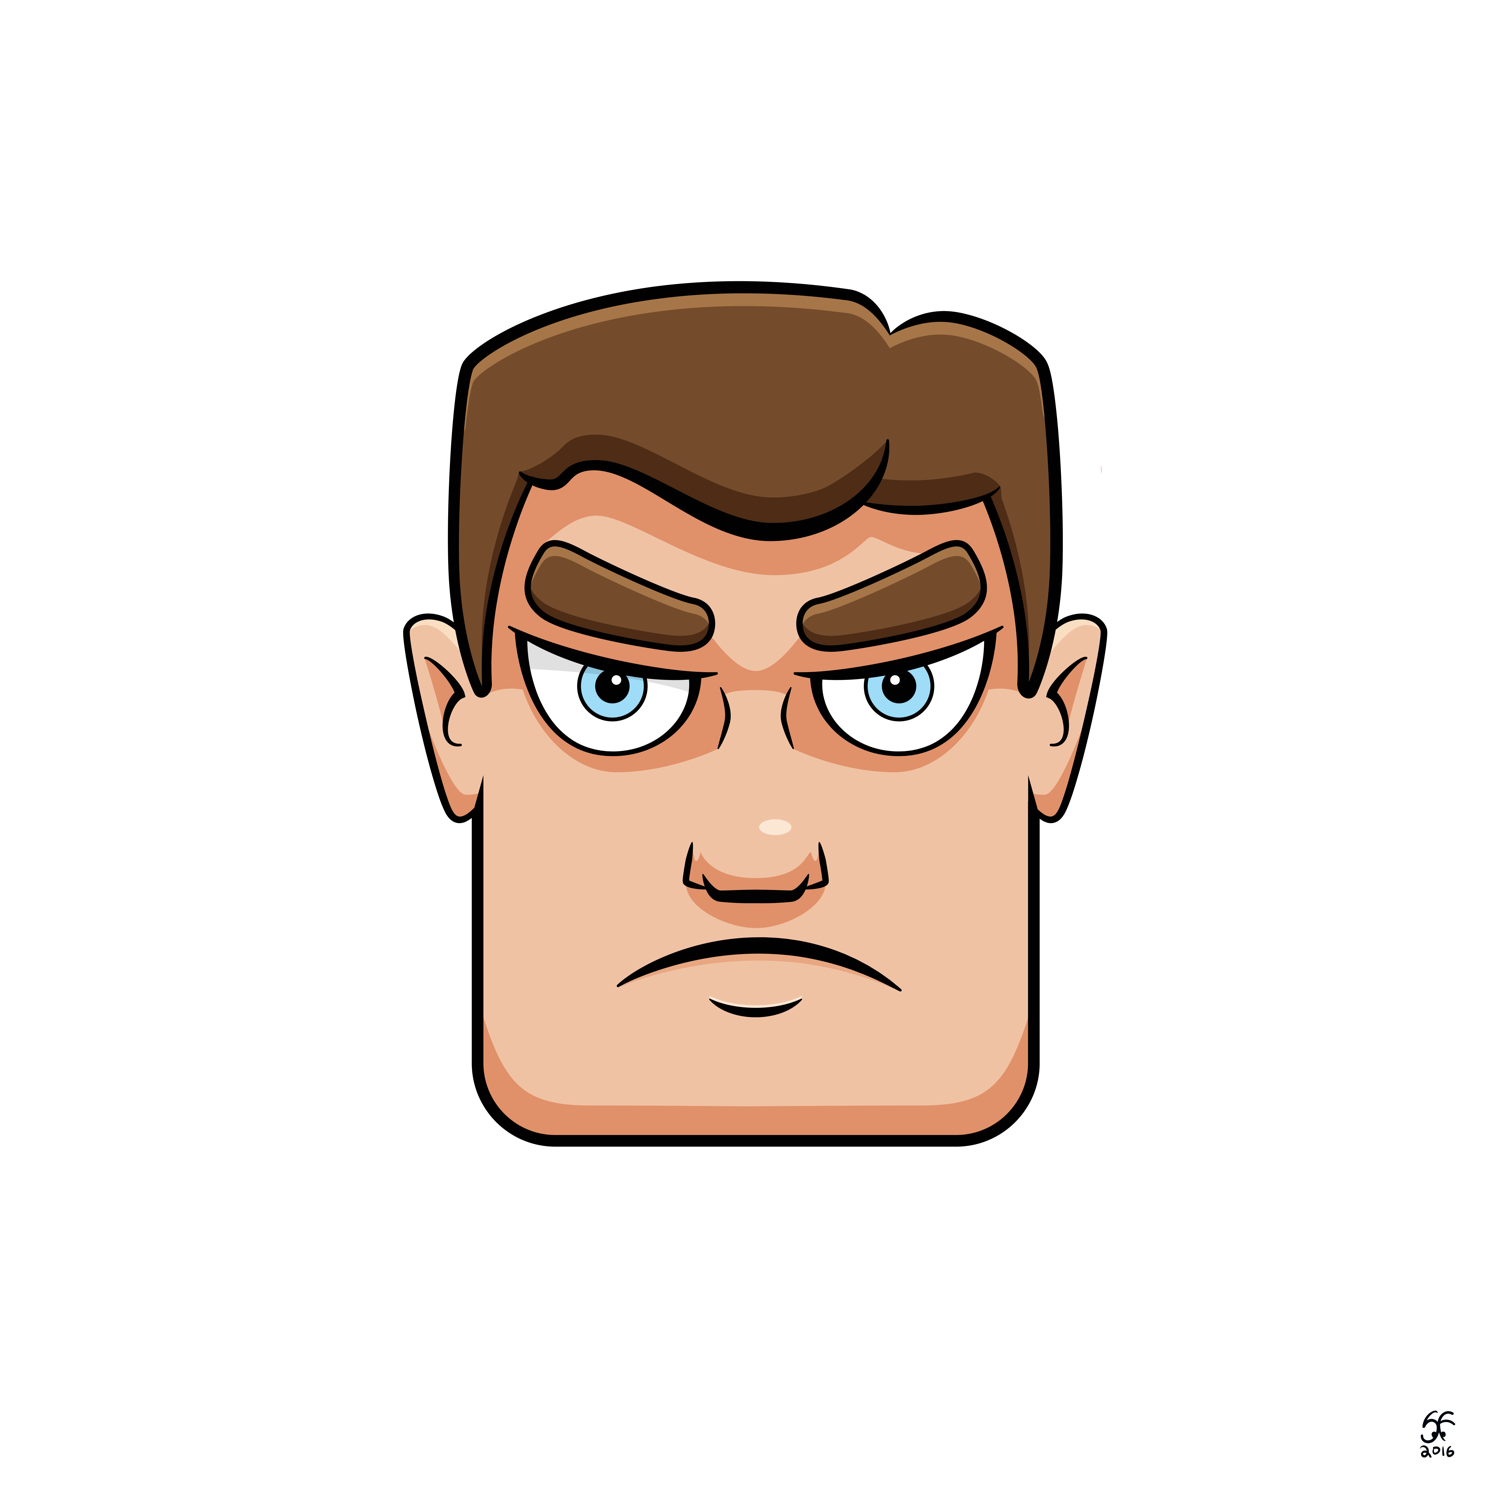 A vector illustrator of a grouchy looking face.